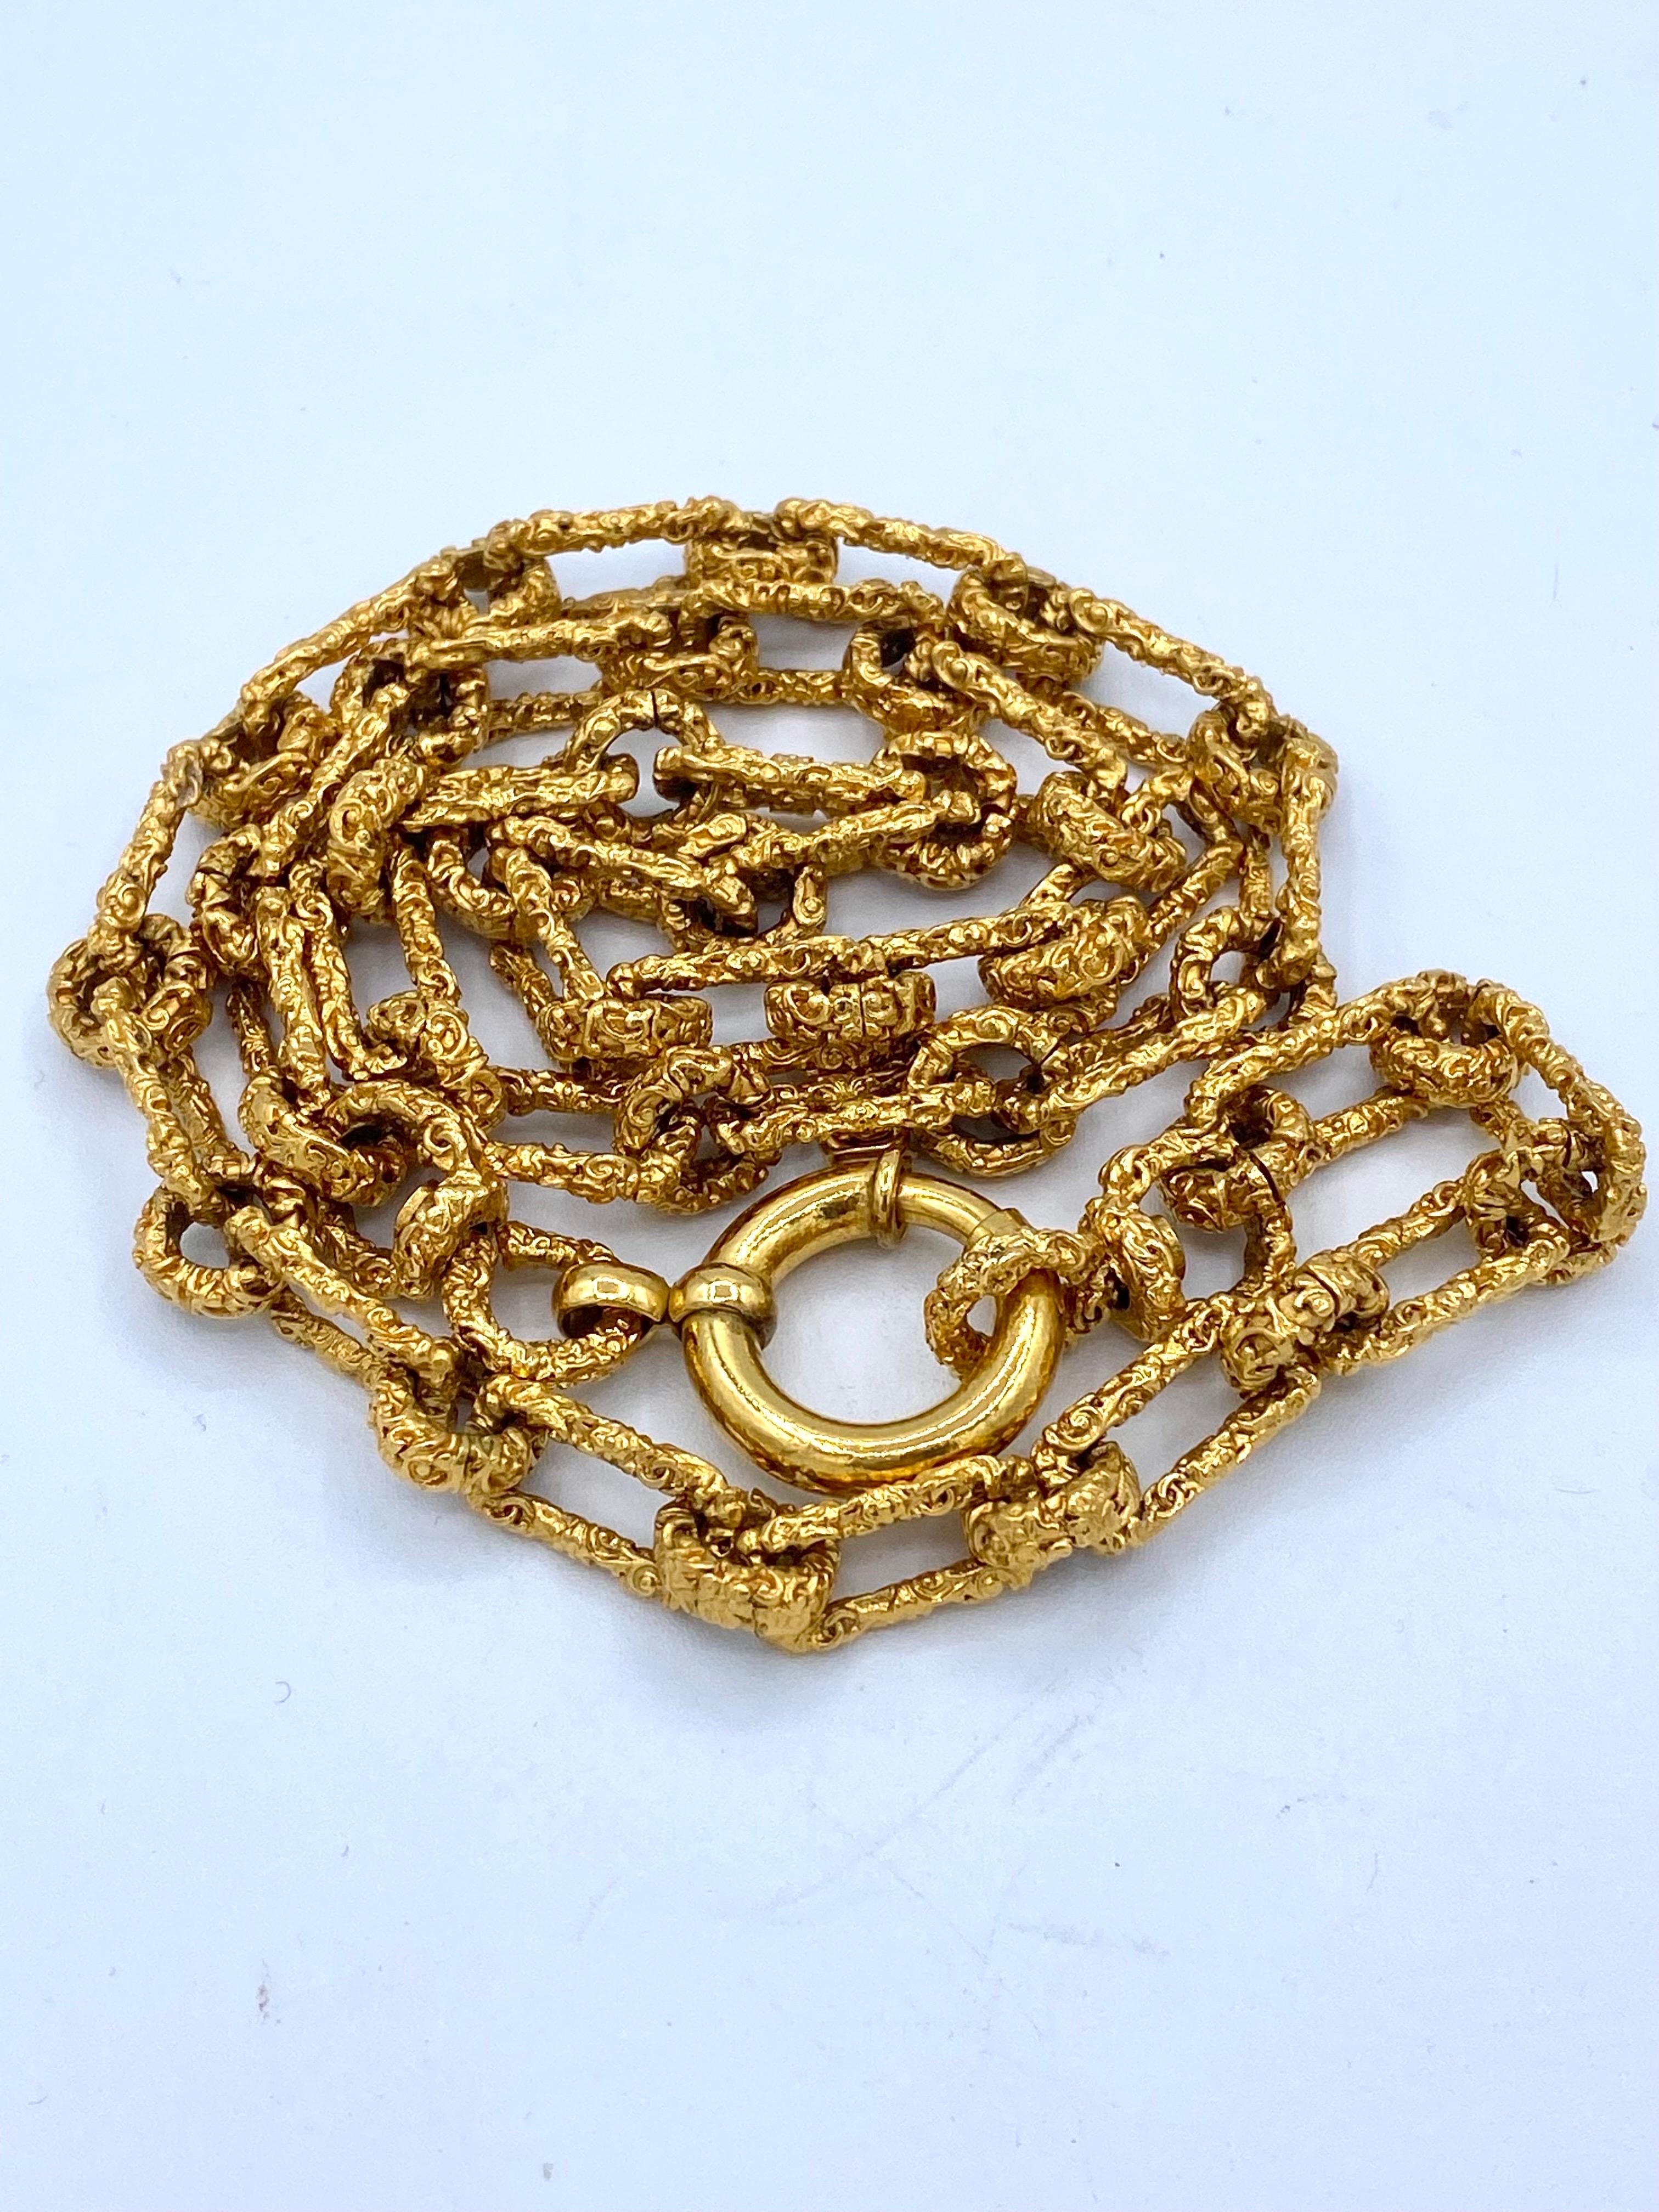 Vintage Chanel necklace from 1990 gold chain textured and intertwined CC pattern 2